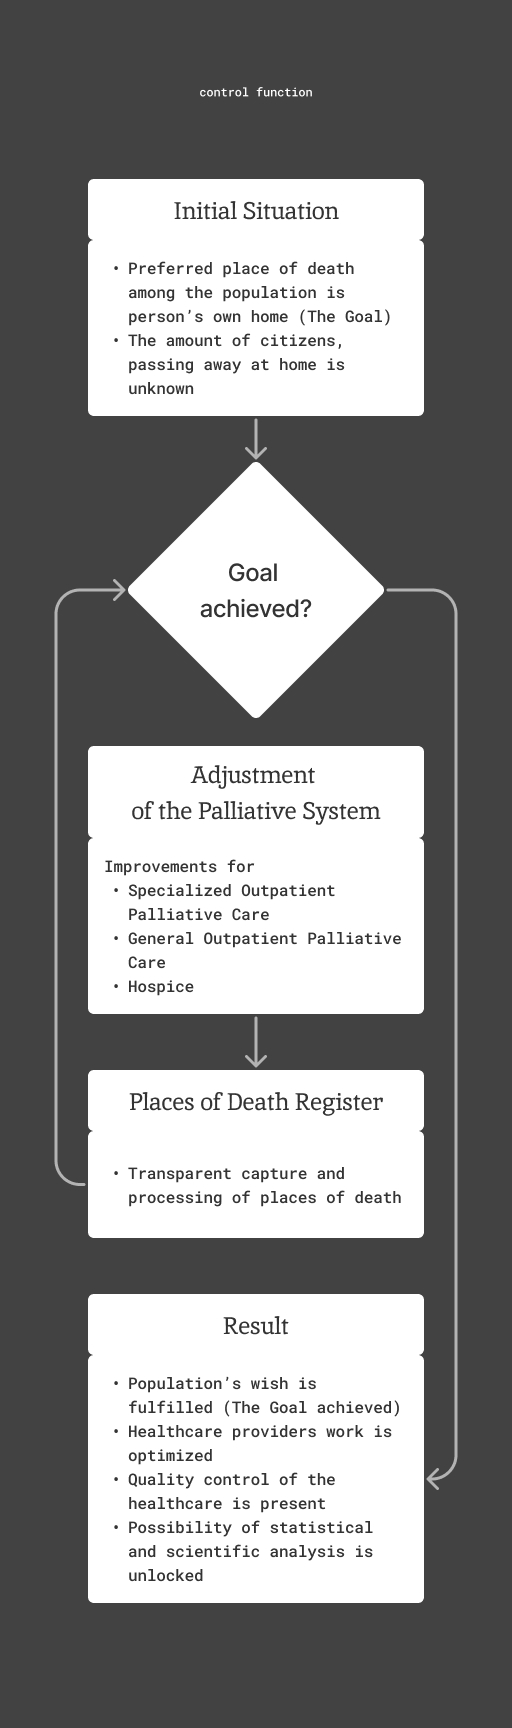 Control Function for the Places of Death Register